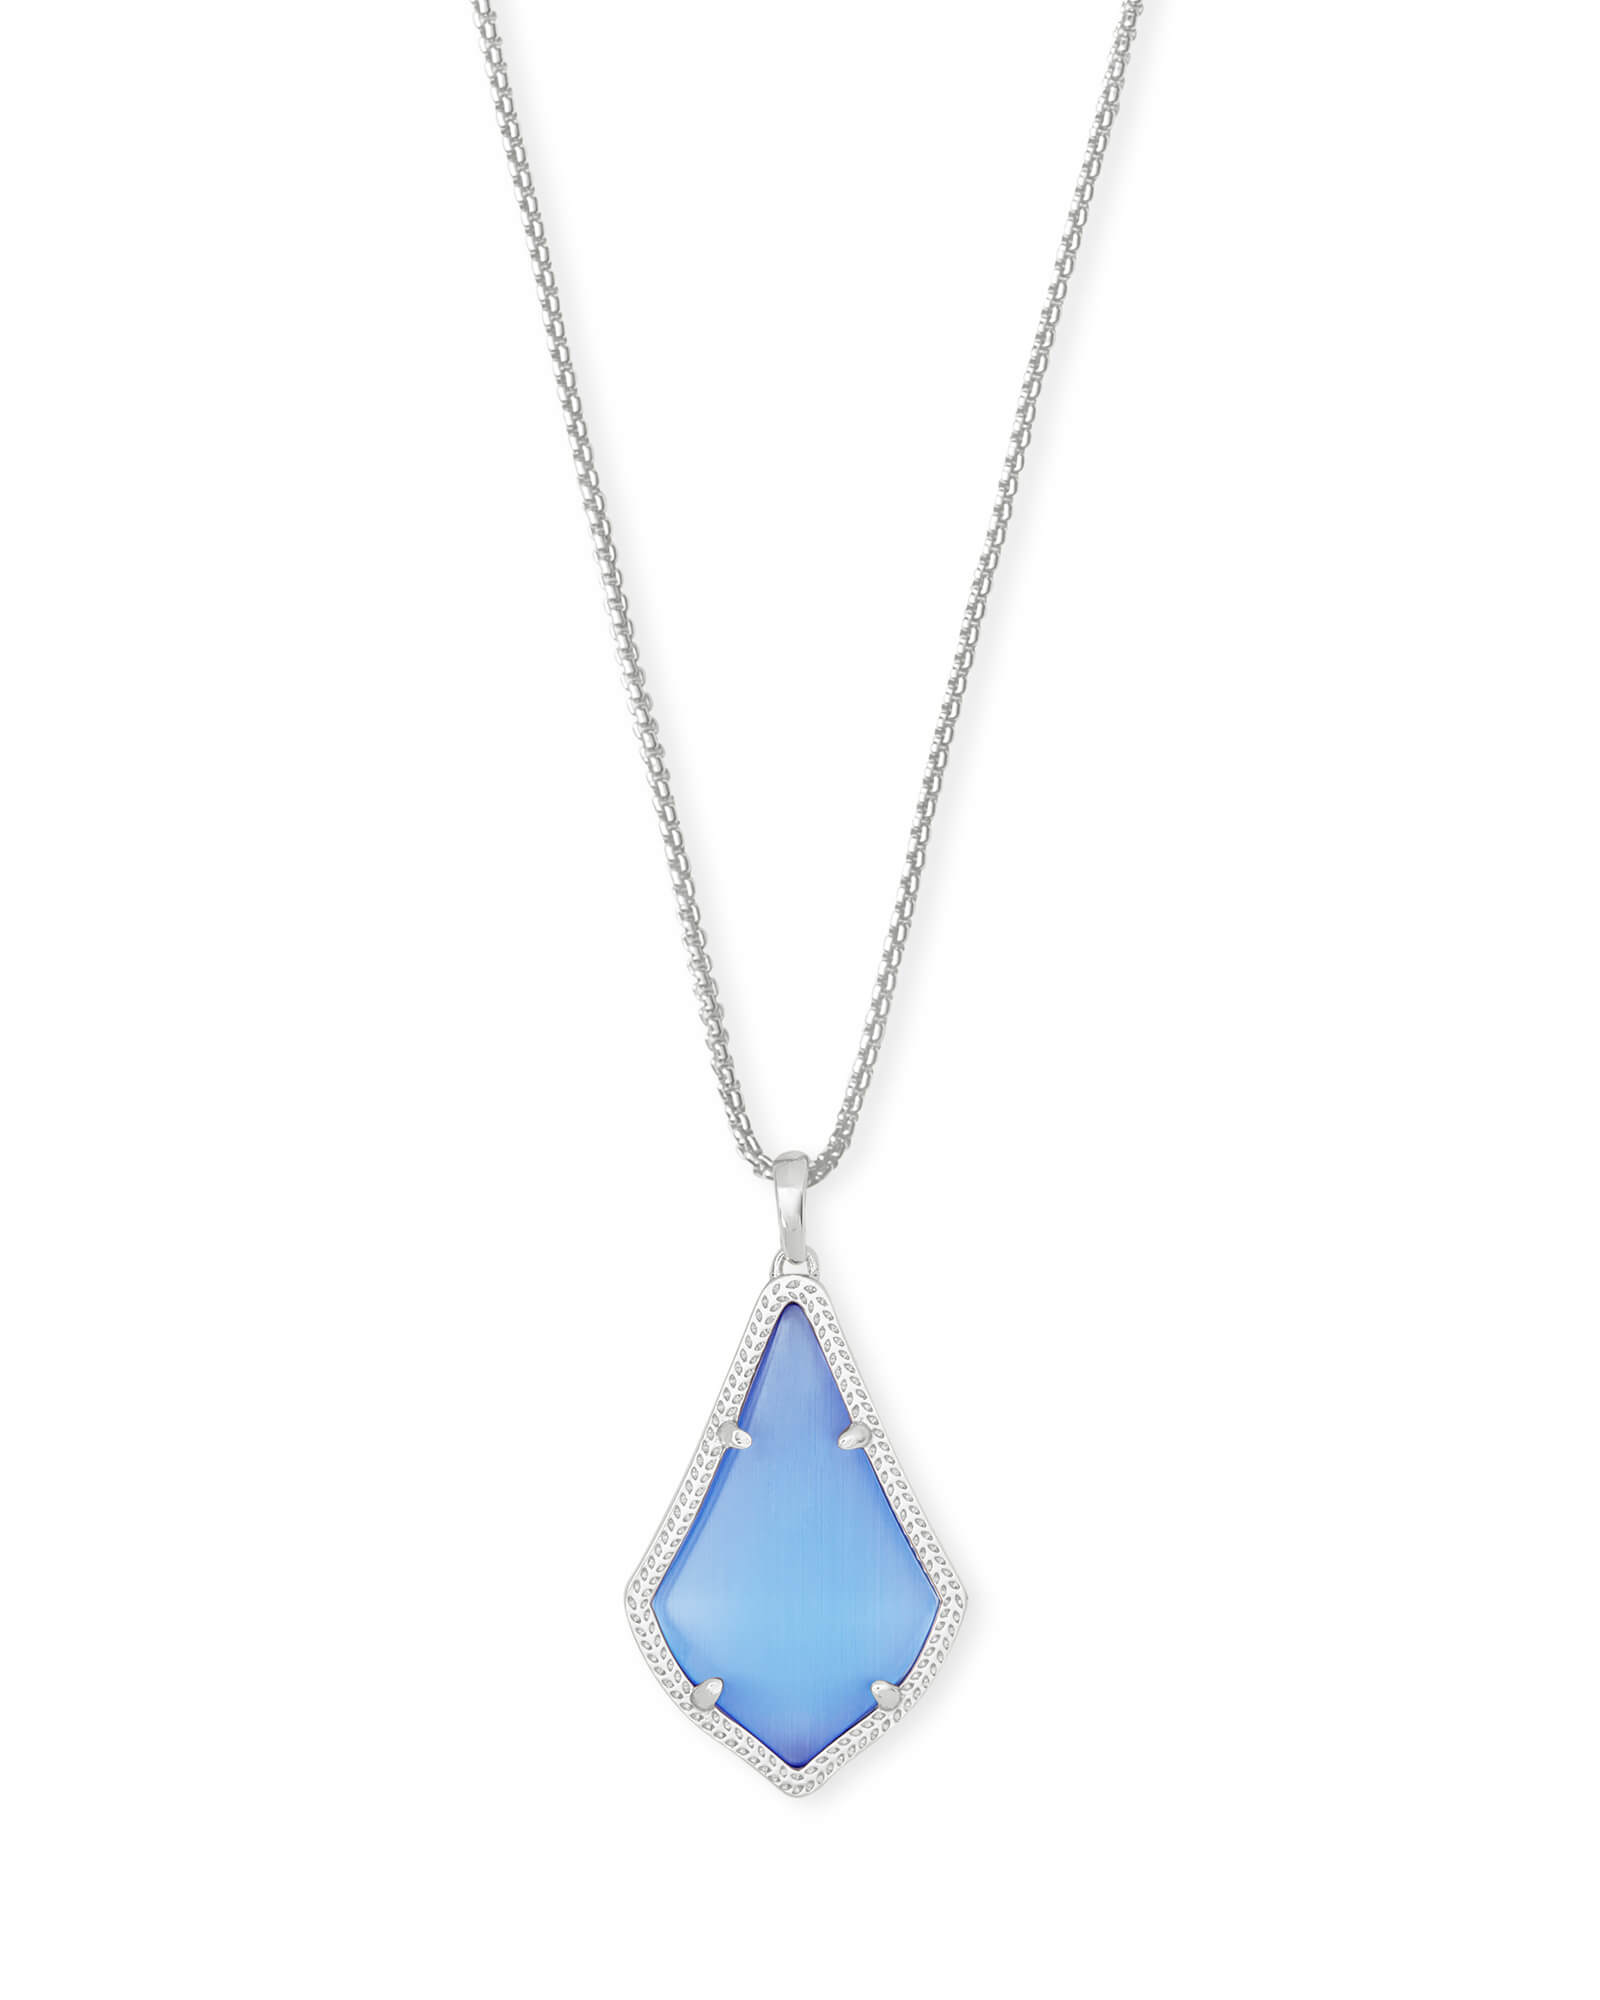 Alex Silver Pendant Necklace in Periwinkle Cat's Eye